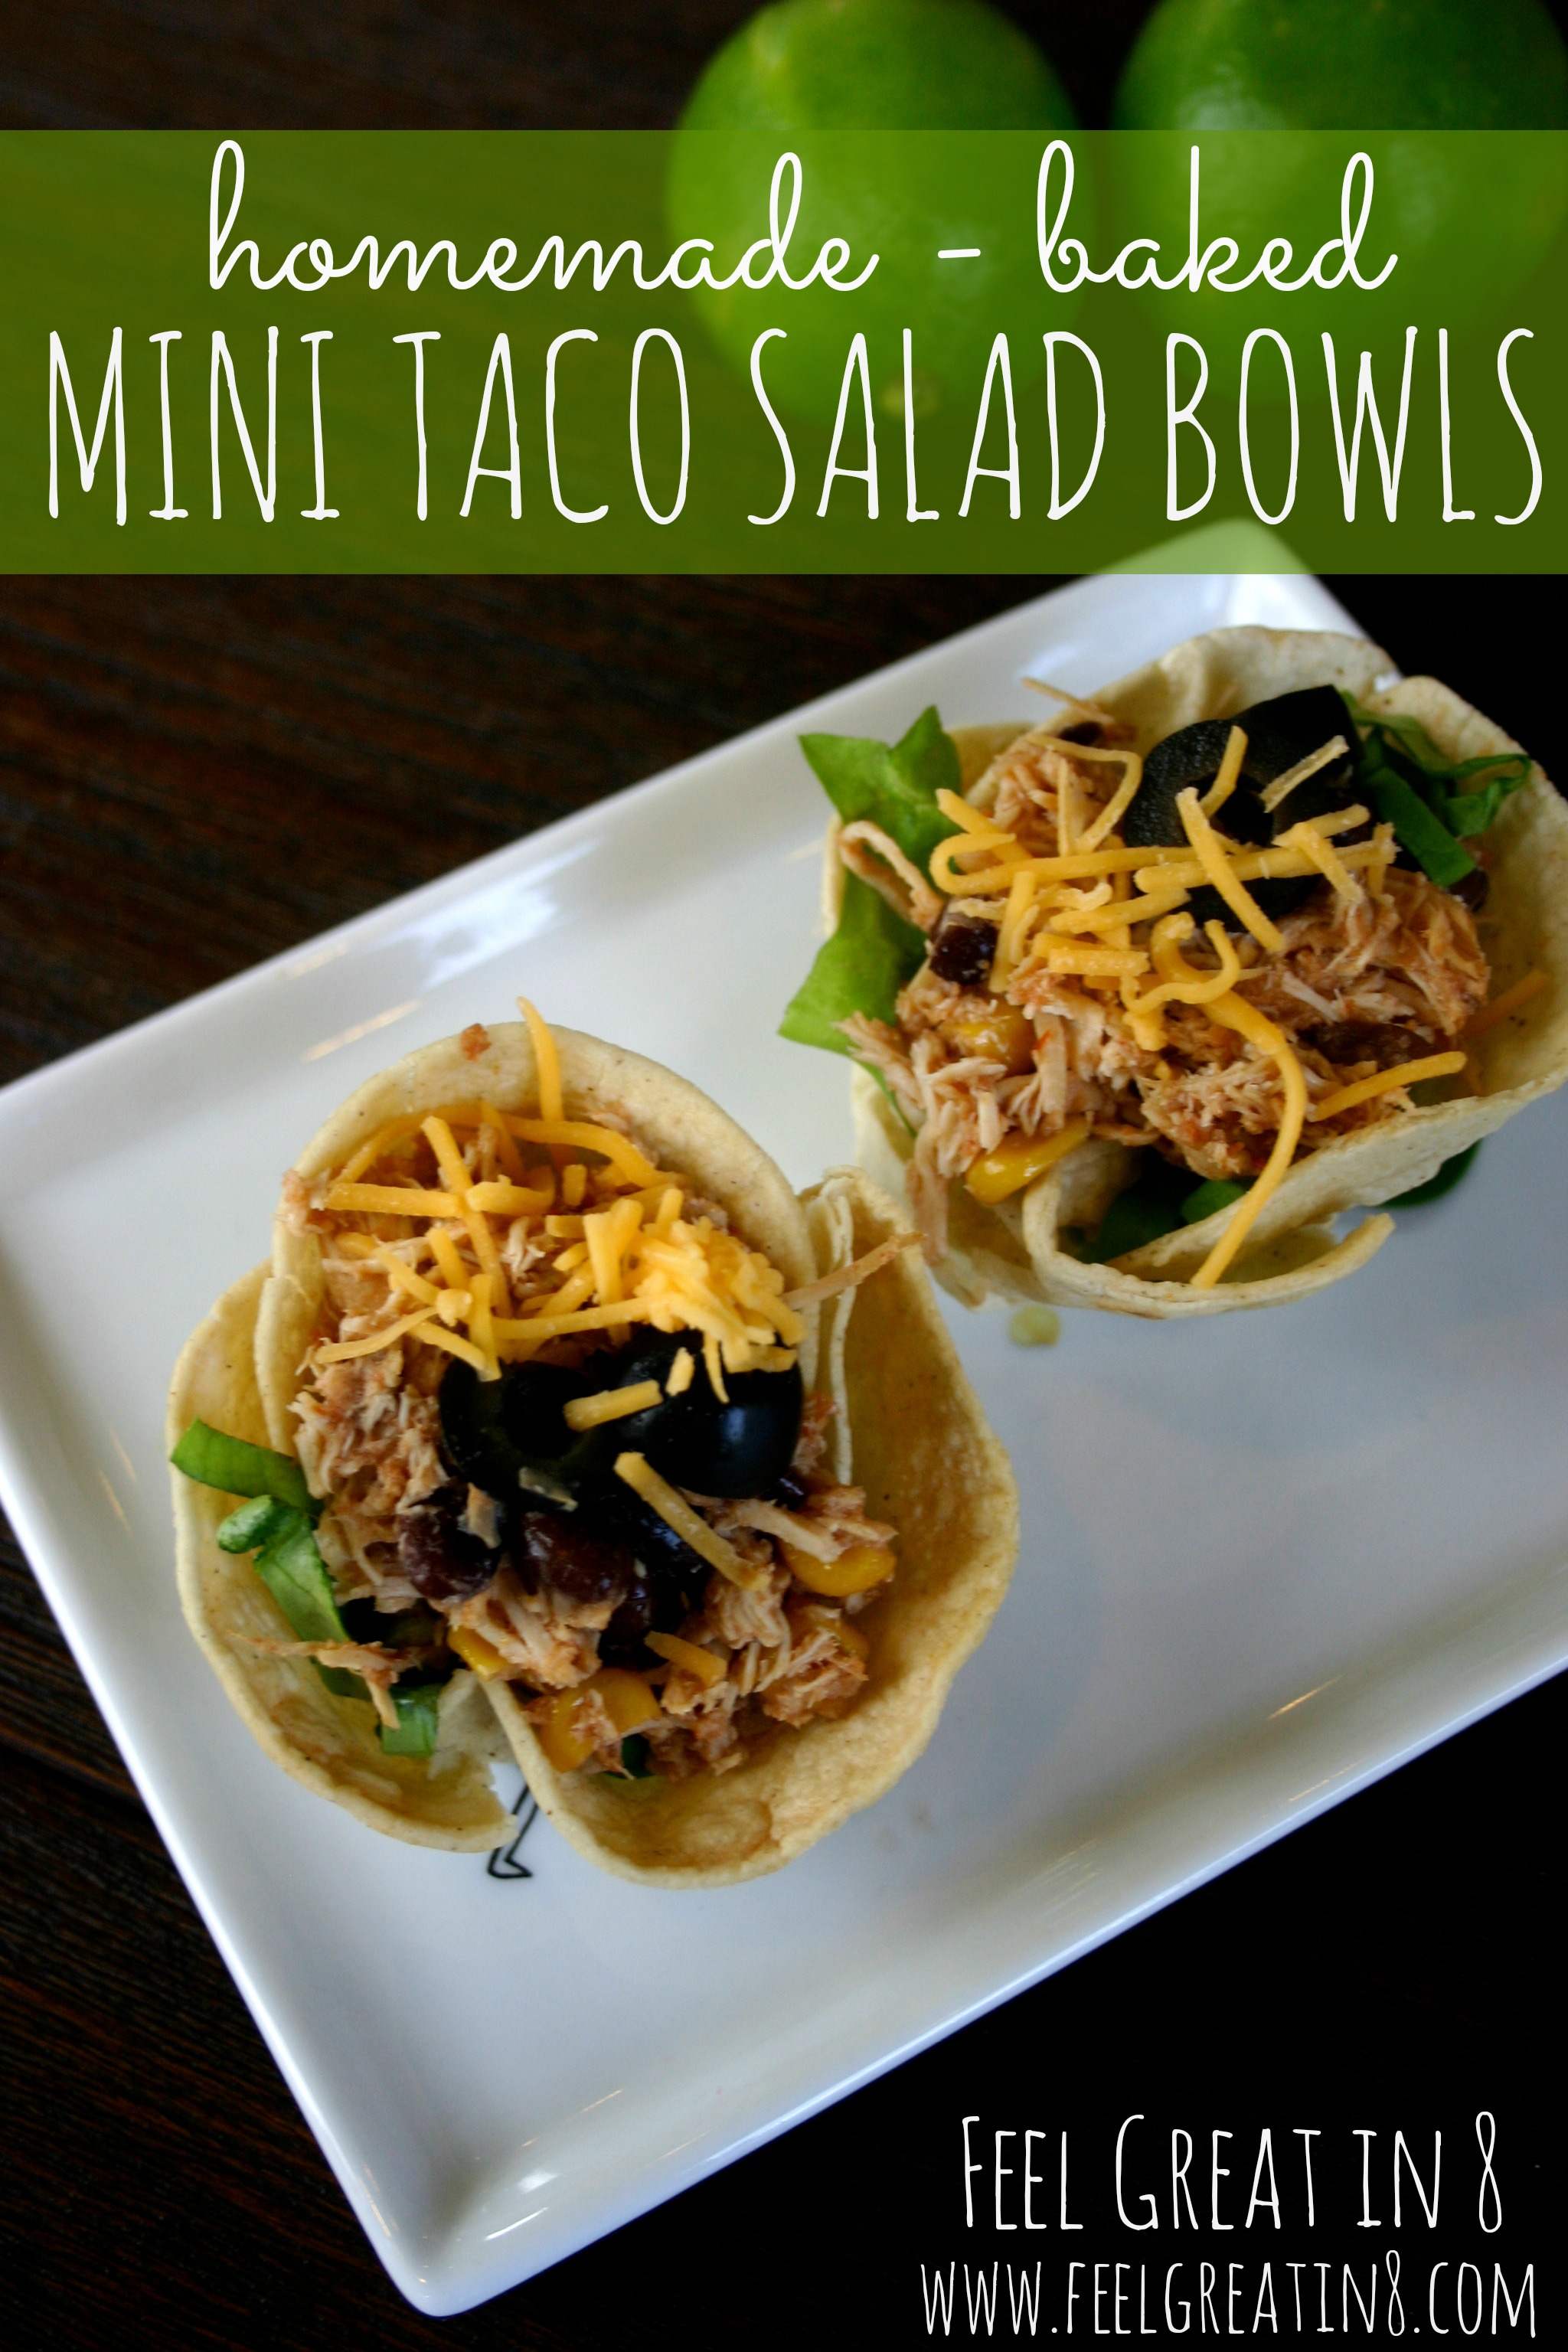 These cute, healthy little Taco Salad Bowls are quick and easy to make! You just need a few simple ingredients, a cupcake pan and an oven. #healthy #quick #easy